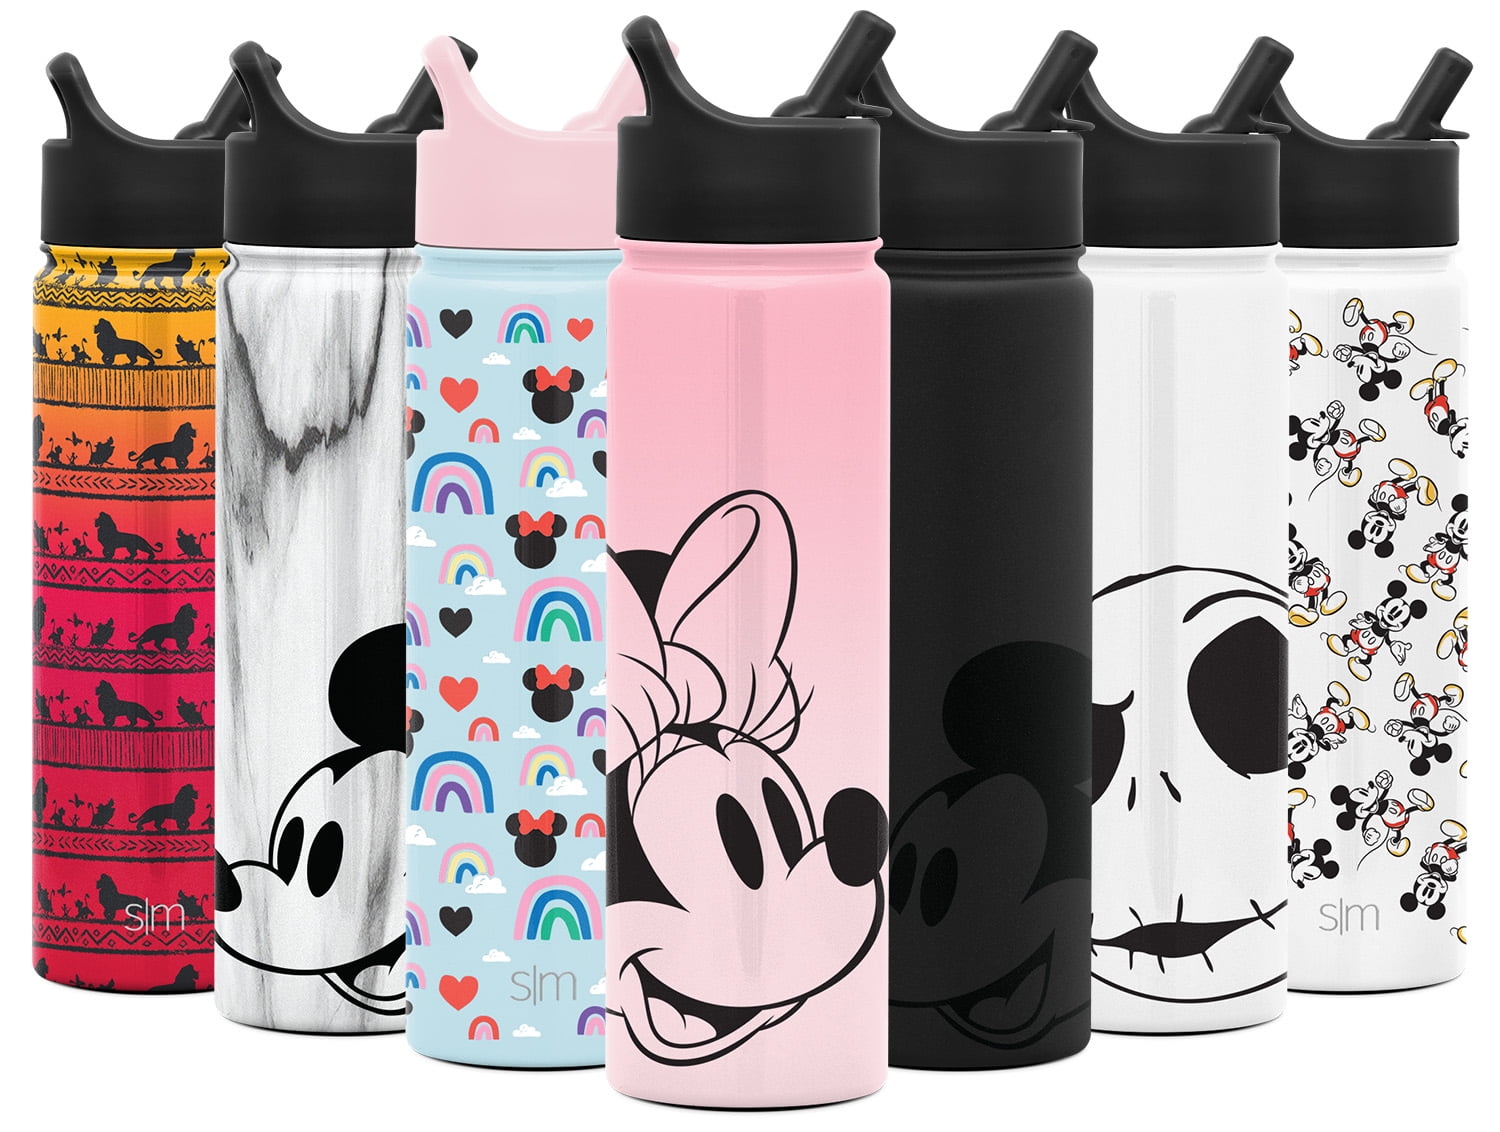 Disney - Minnie Mouse One And Only Aluminium Water Bottle 500ml